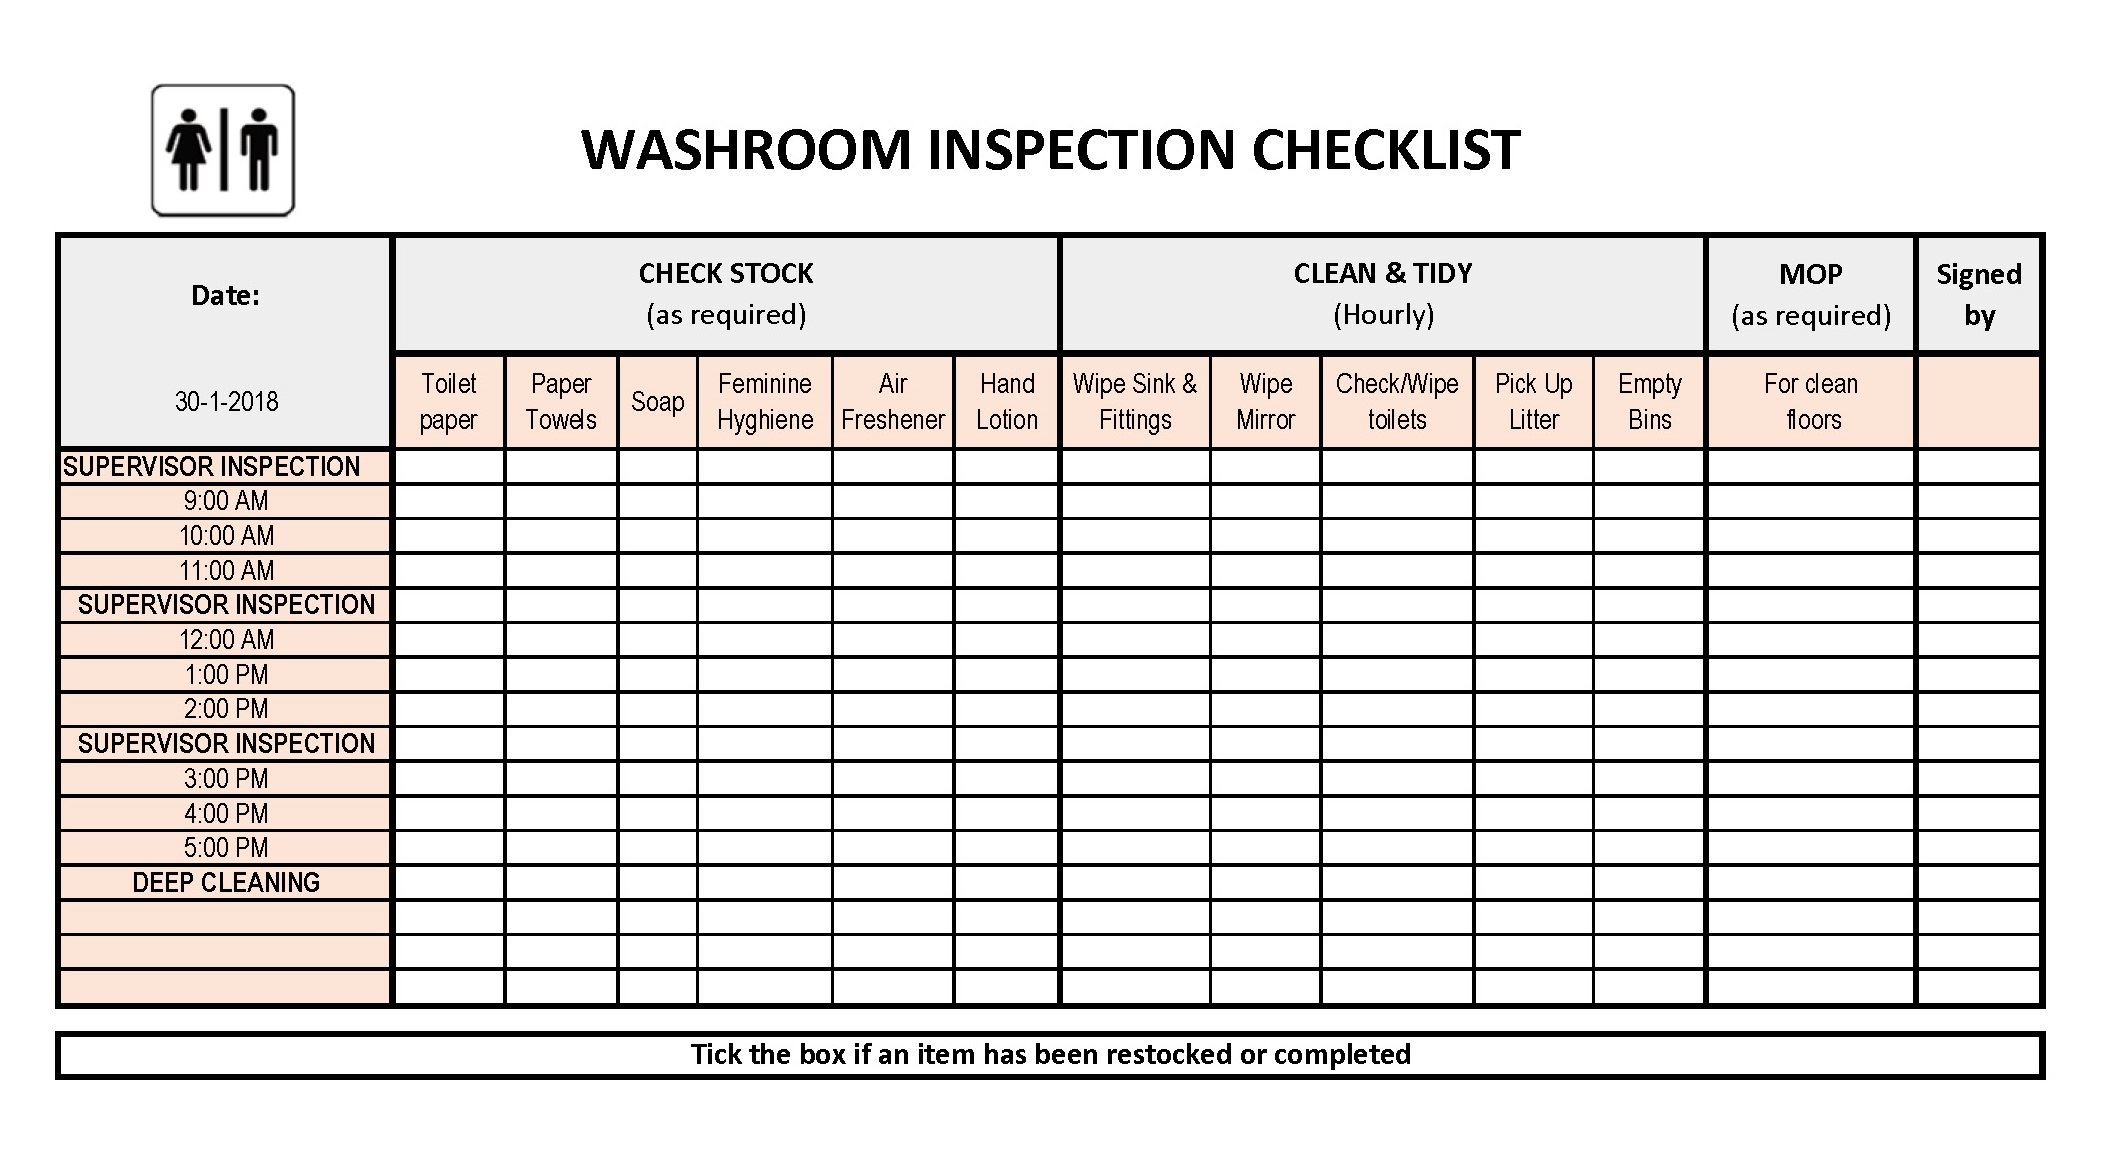 Public restroom cleaning checklists